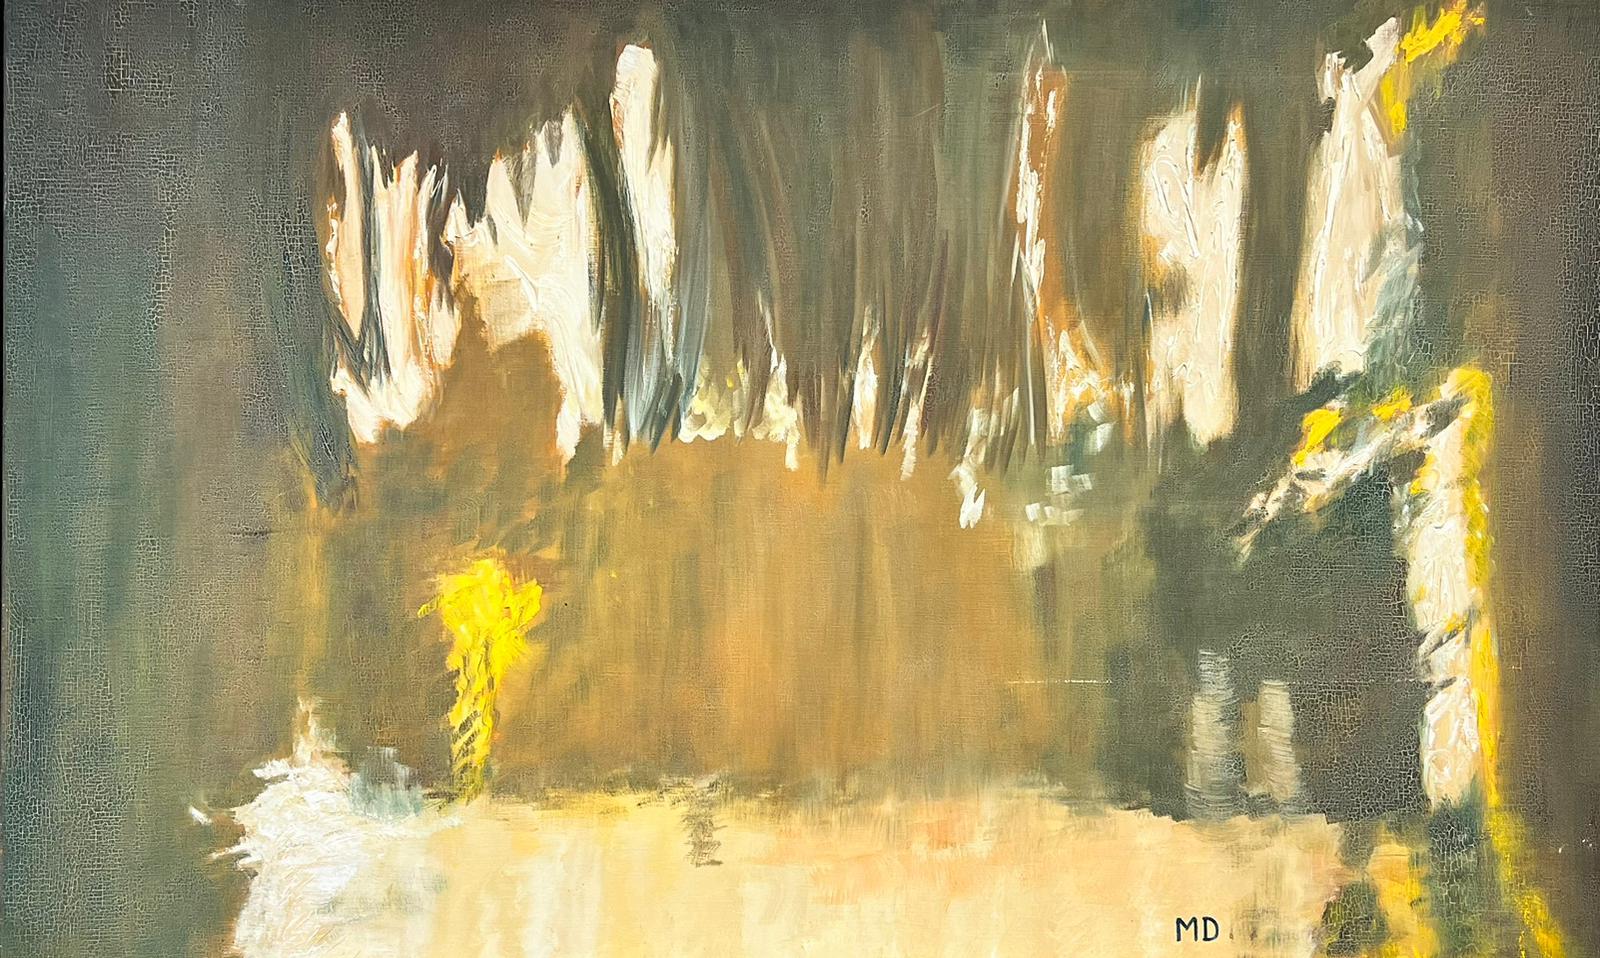 Artist/ School: French abstract School, late 20th century/ early 21st century, inscribed initials MD

Title: Brown, yellow, beige abstract composition painted on a very large scale. 

Medium: oil on canvas, framed

Framed: 31 x 48 inches
Painting: